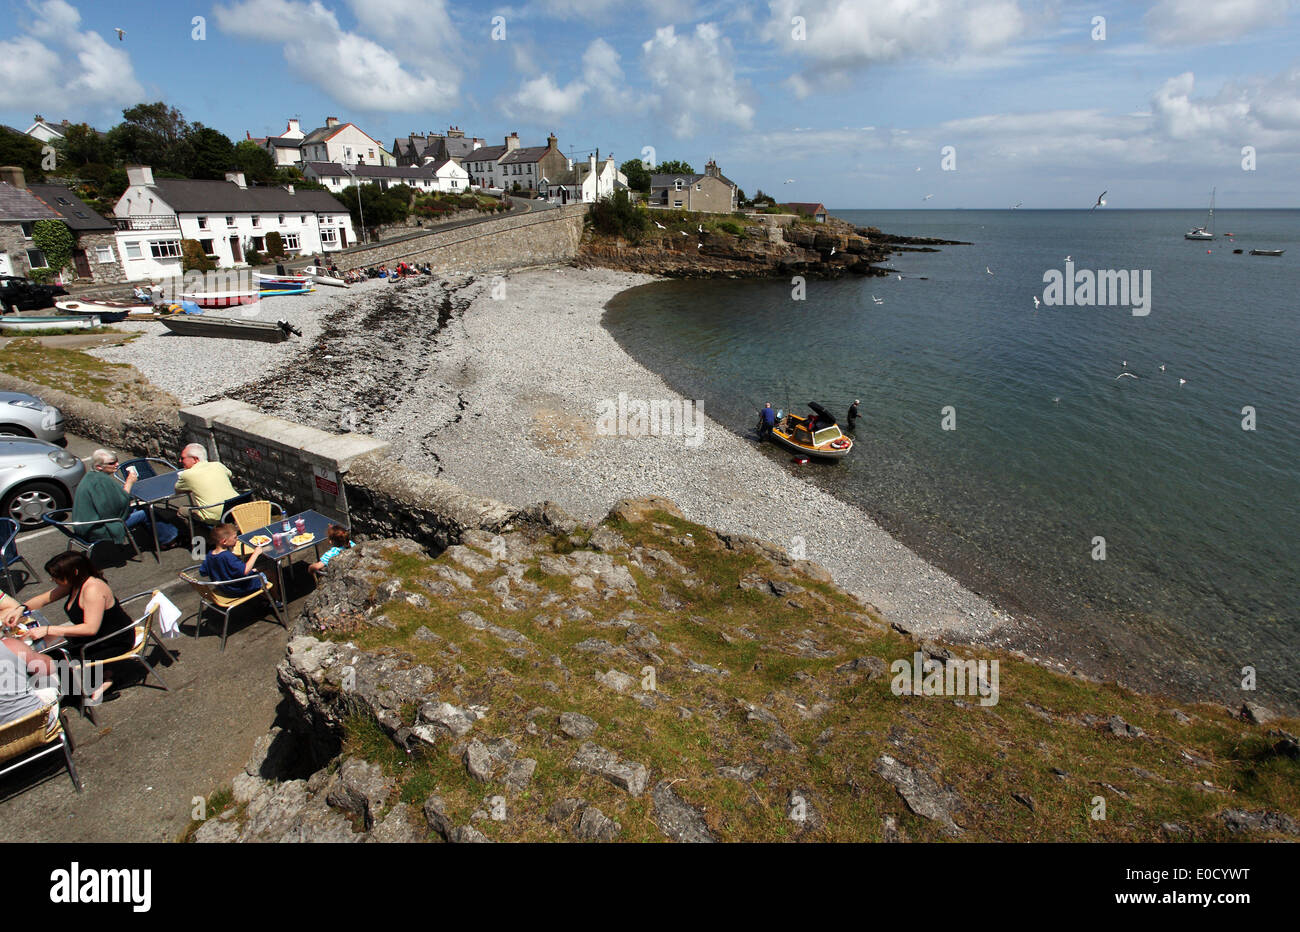 The bay of Moelfre in the north-west of the island Angesey, North Wales, Great Britain, Europe Stock Photo